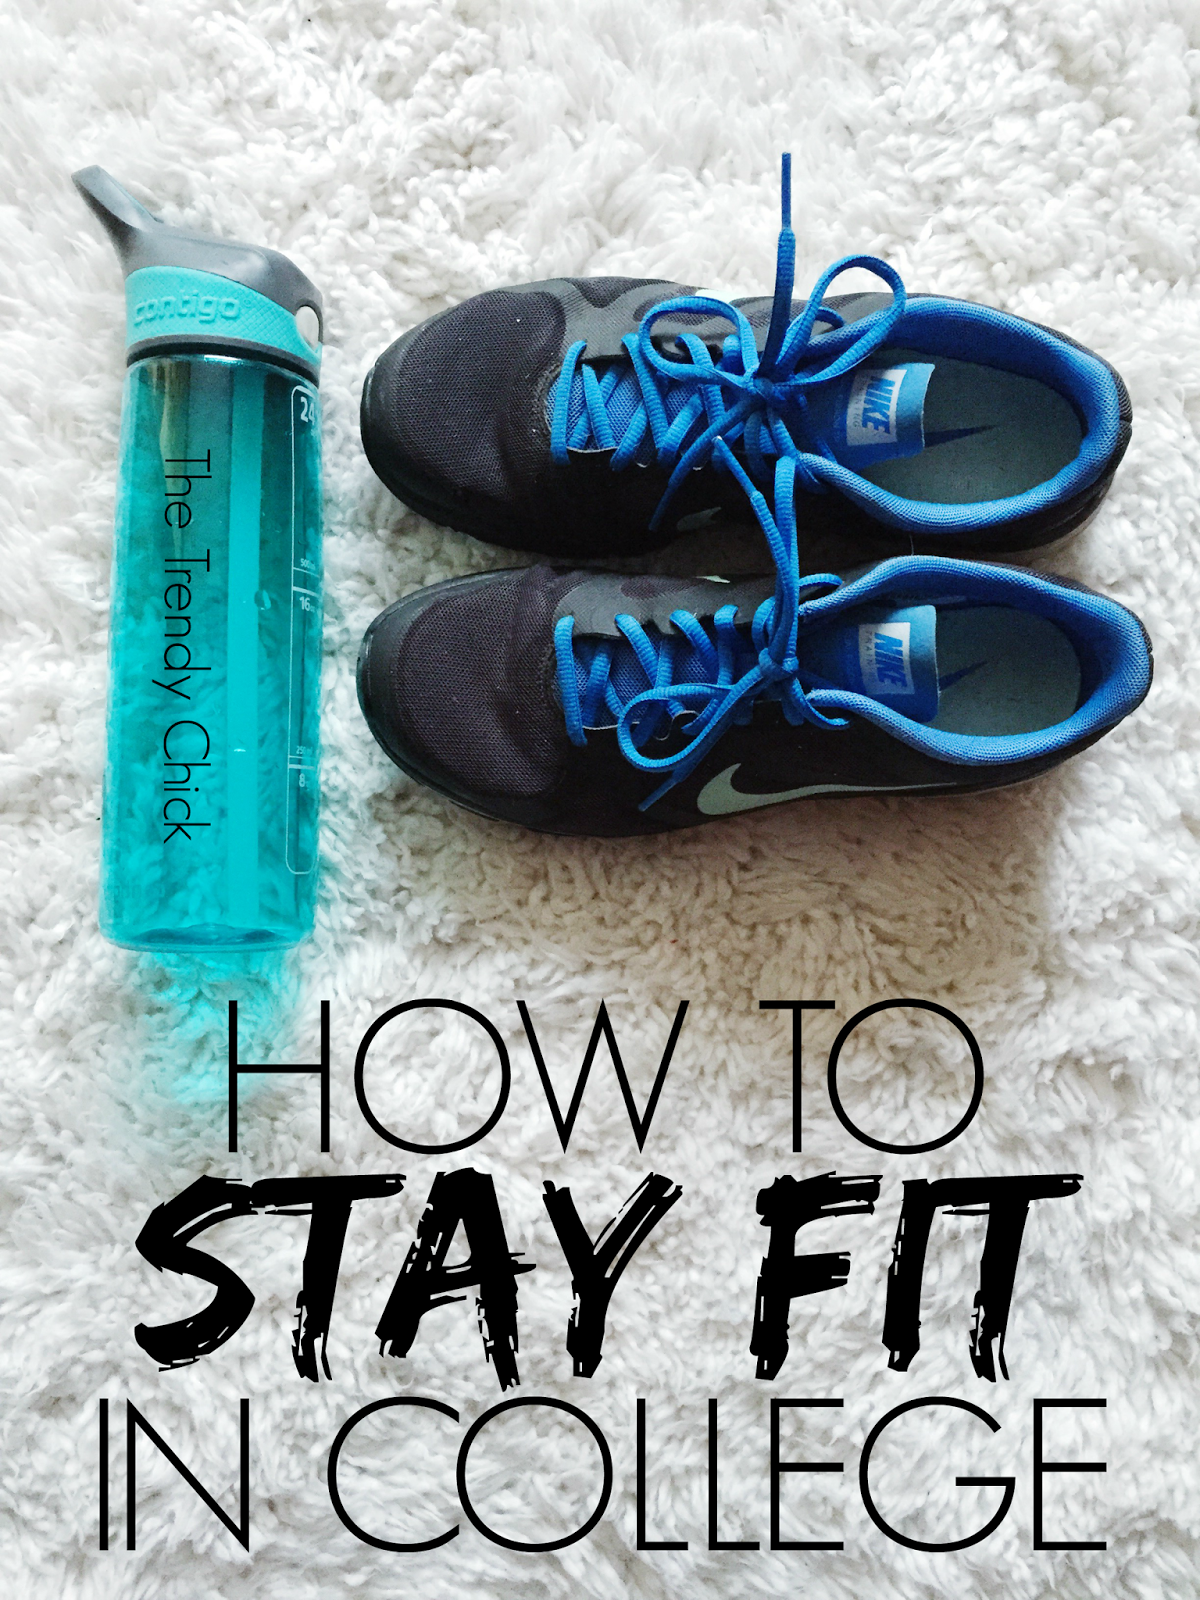 How To Stay Fit In College